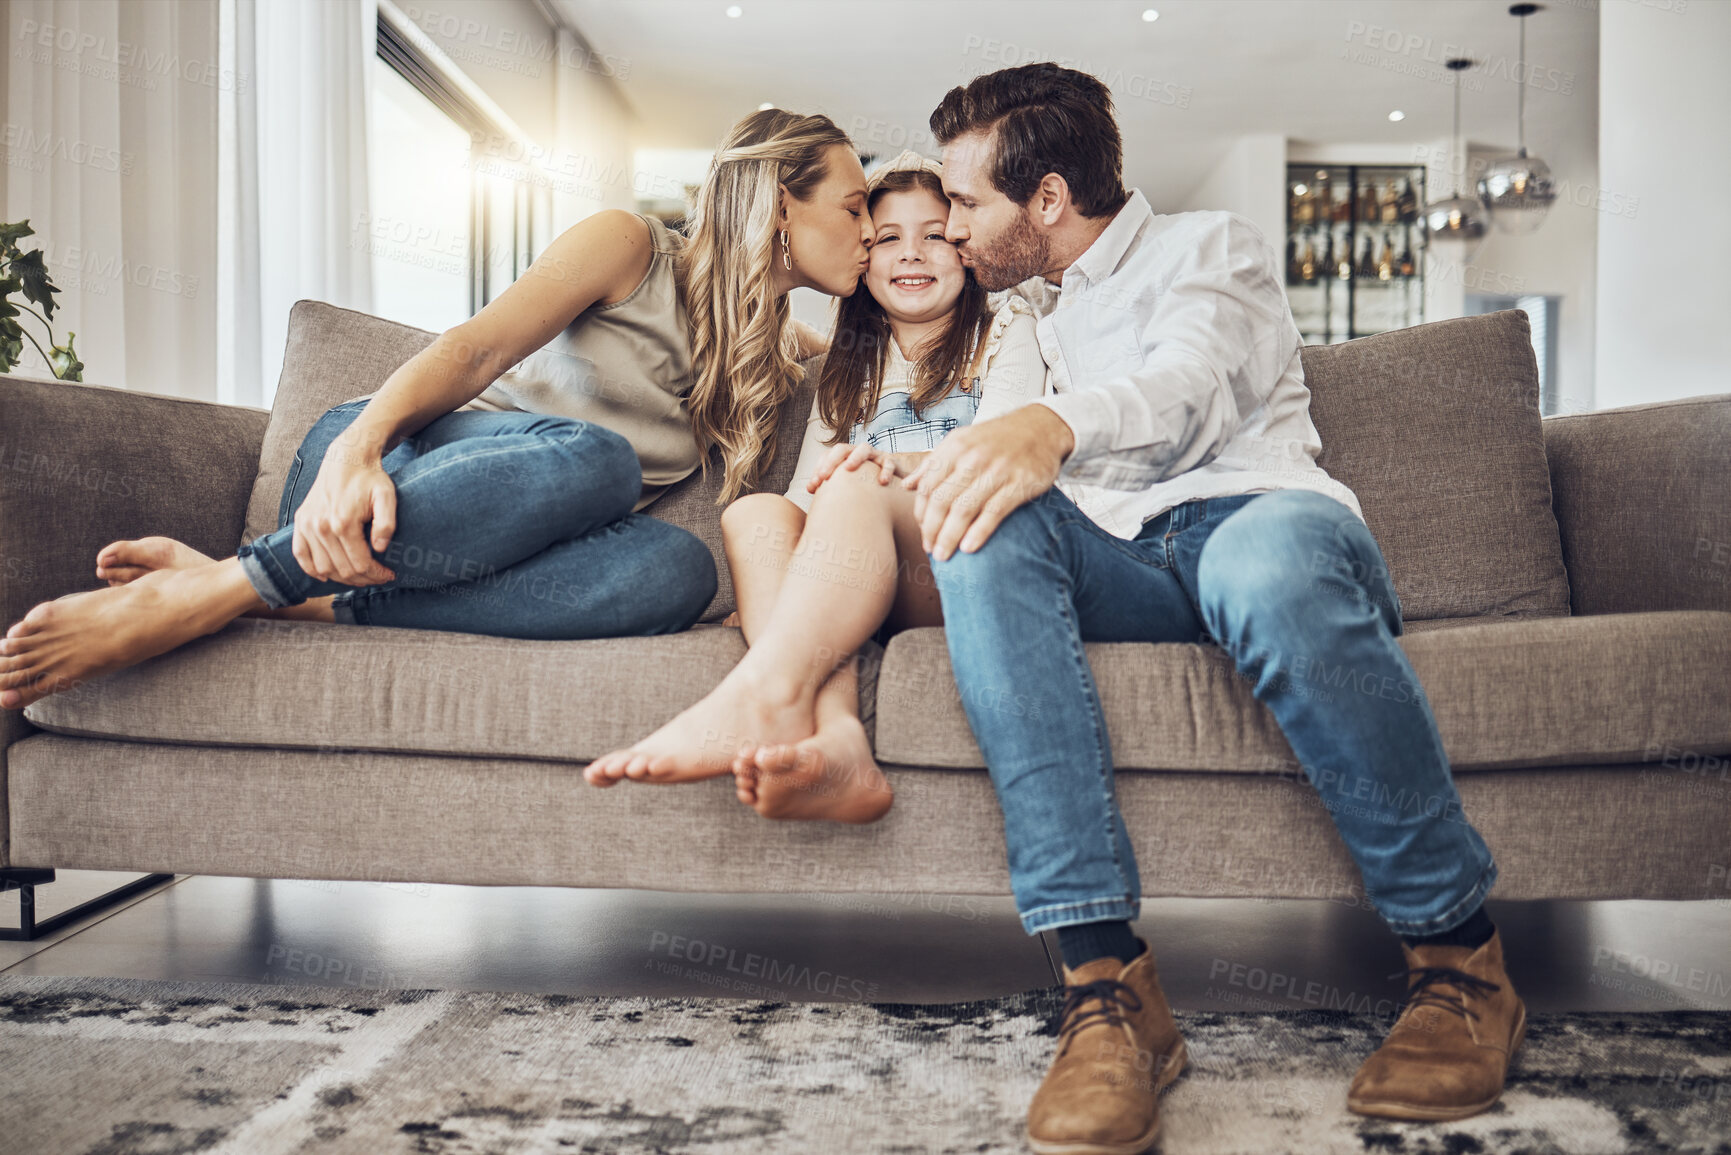 Buy stock photo Kiss, mother or father with a girl as a happy family in living room bonding in Australia with love or care. Child, young kid or parents relaxing with a smile enjoying quality time on a fun holiday 